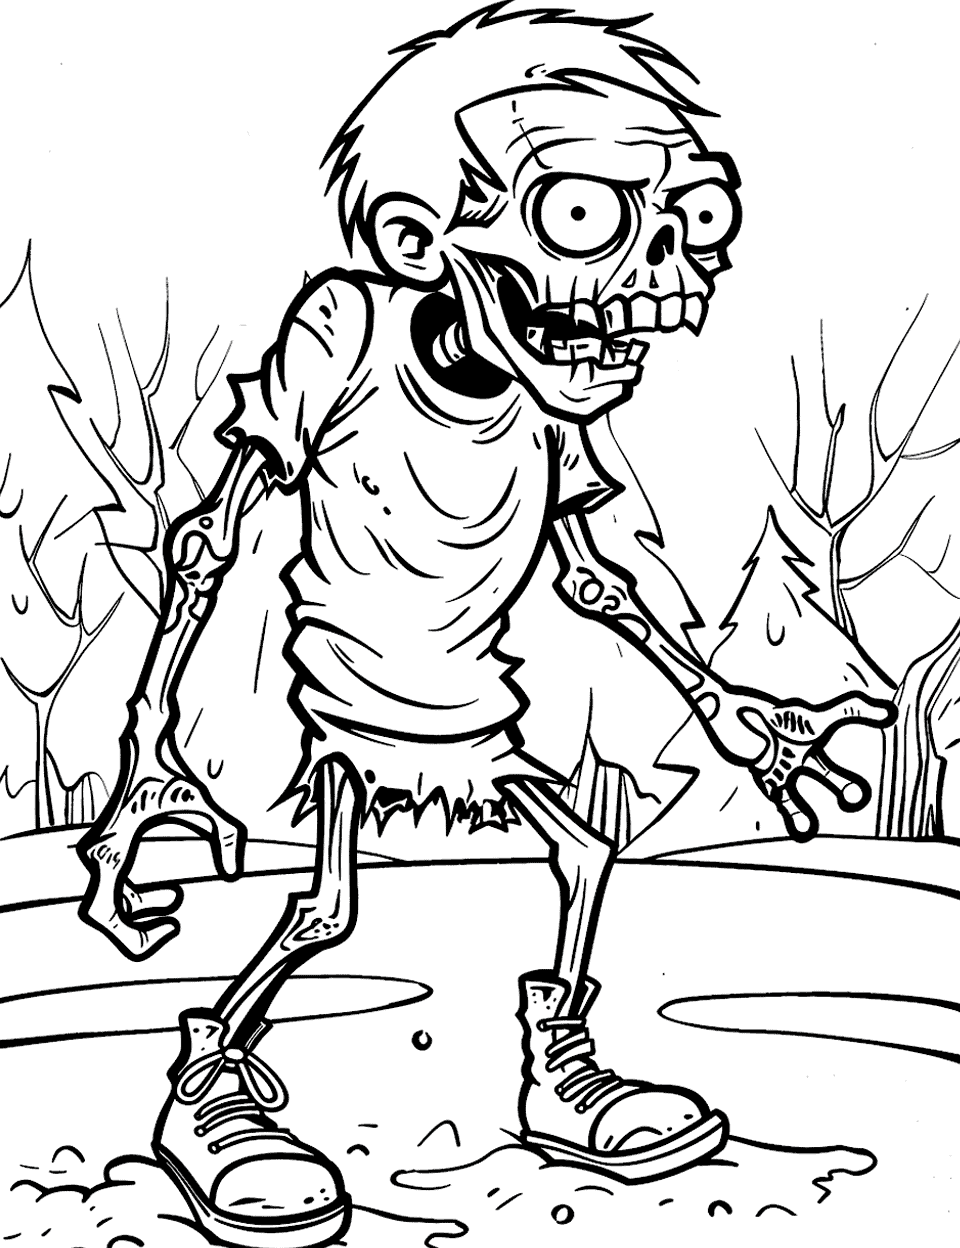 Zombie in the Snow Coloring Page - A single zombie trudging through a snowy landscape.